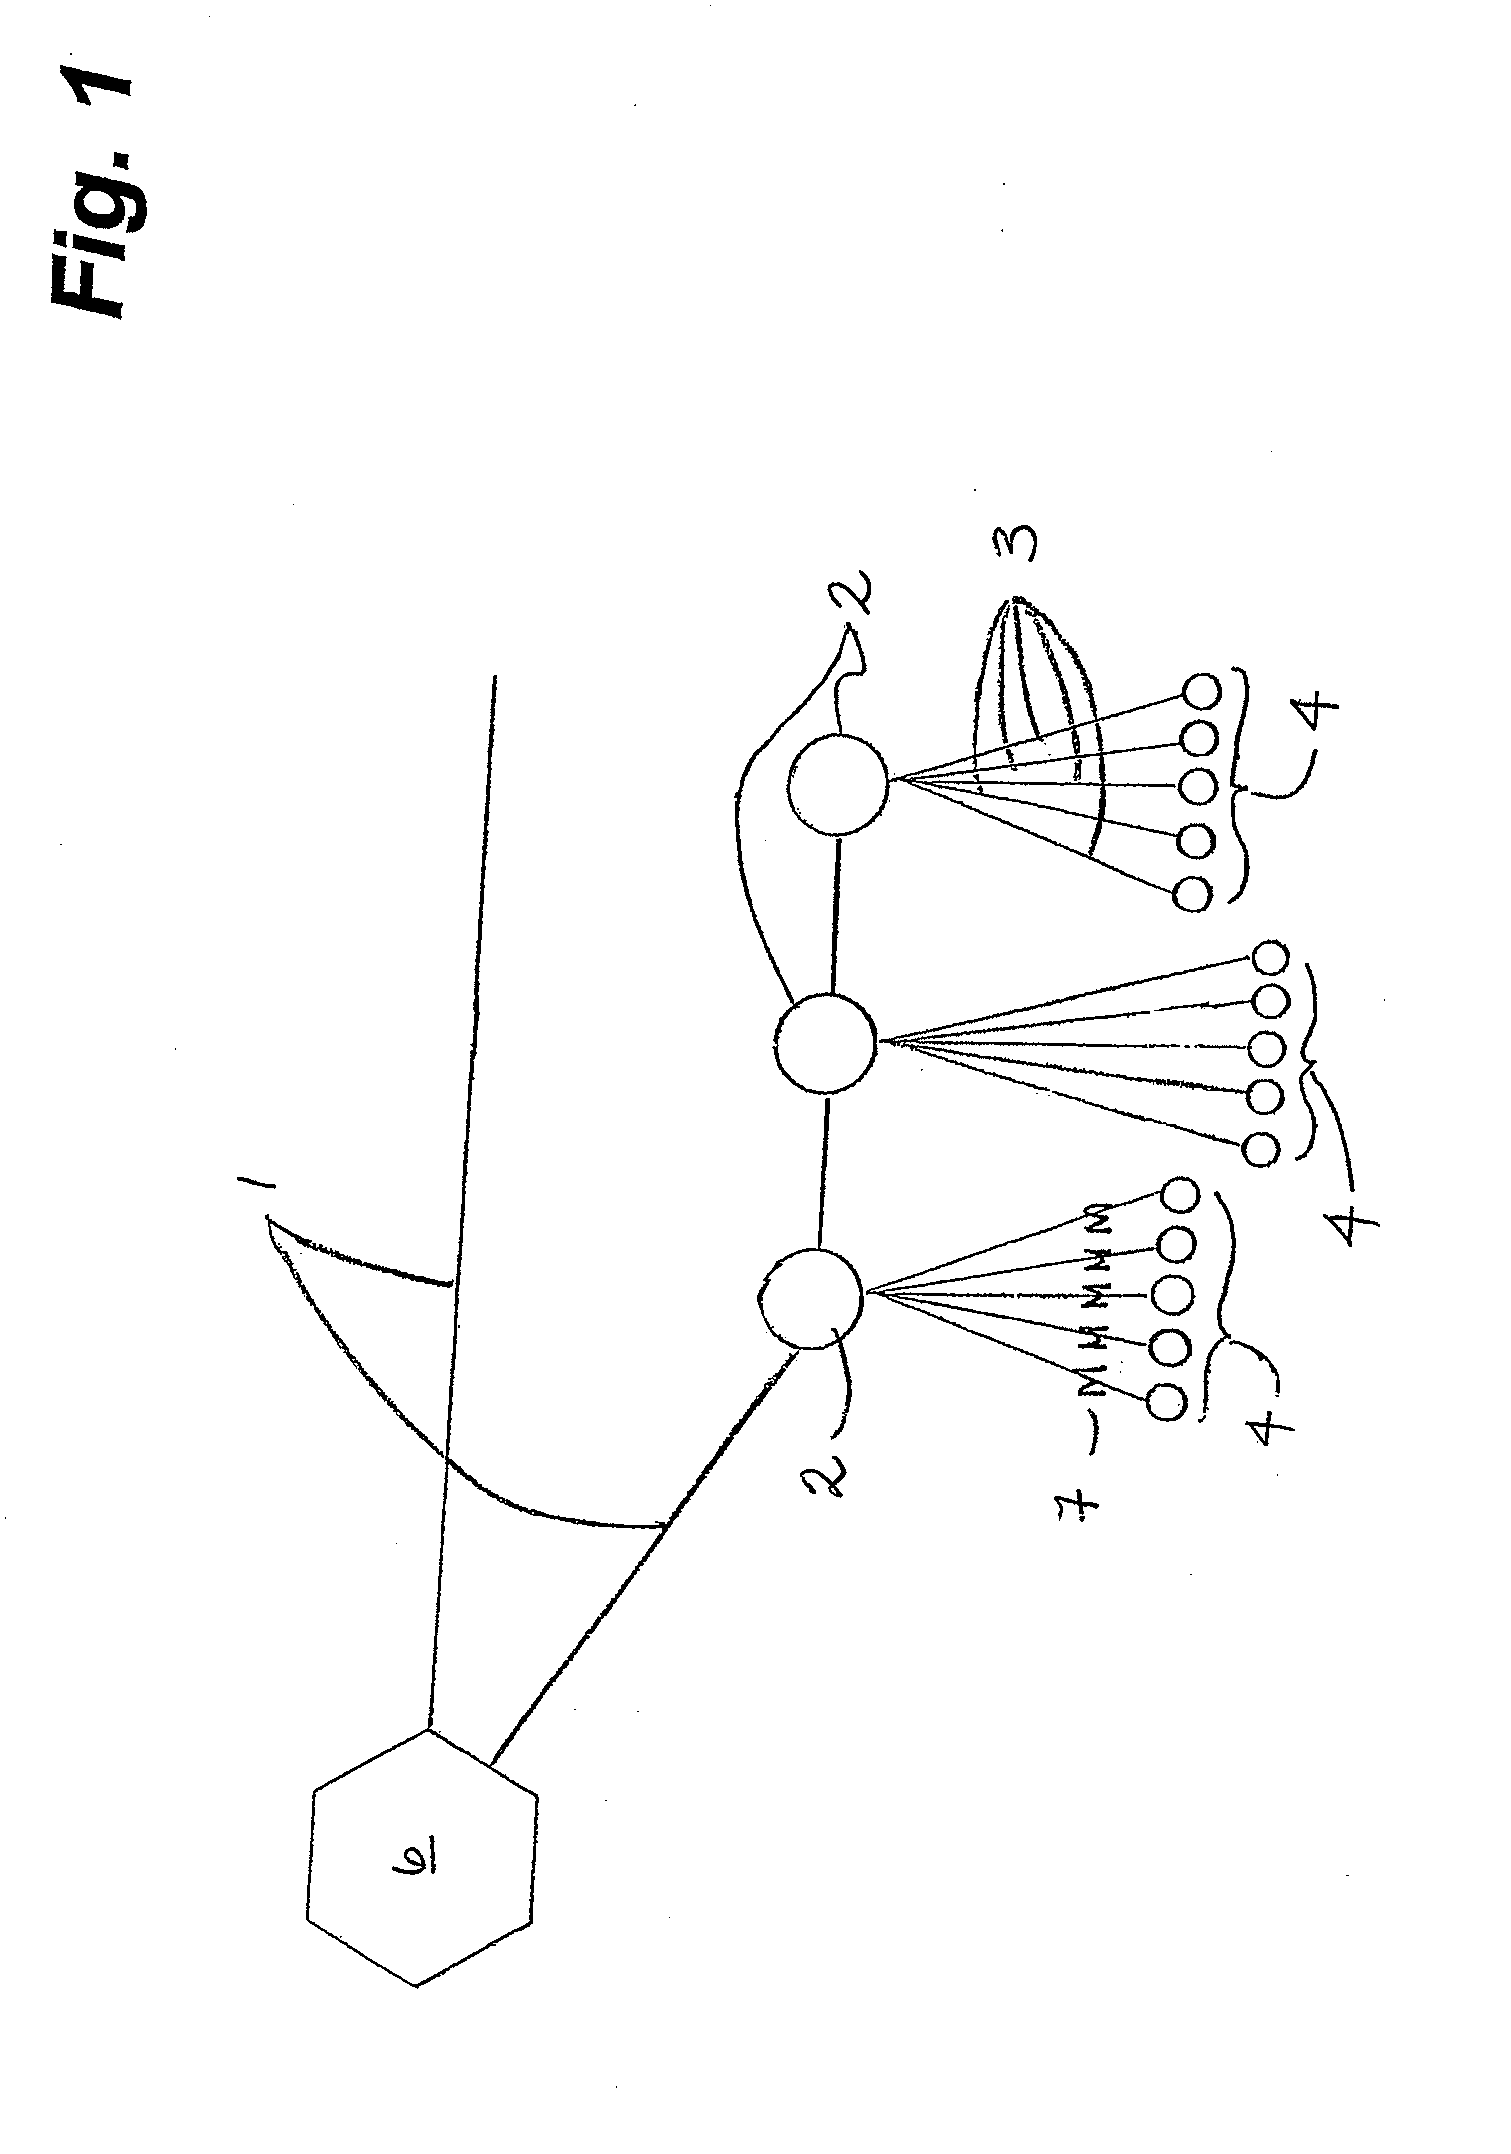 Electrical profile monitoring system for detection of atypical consumption